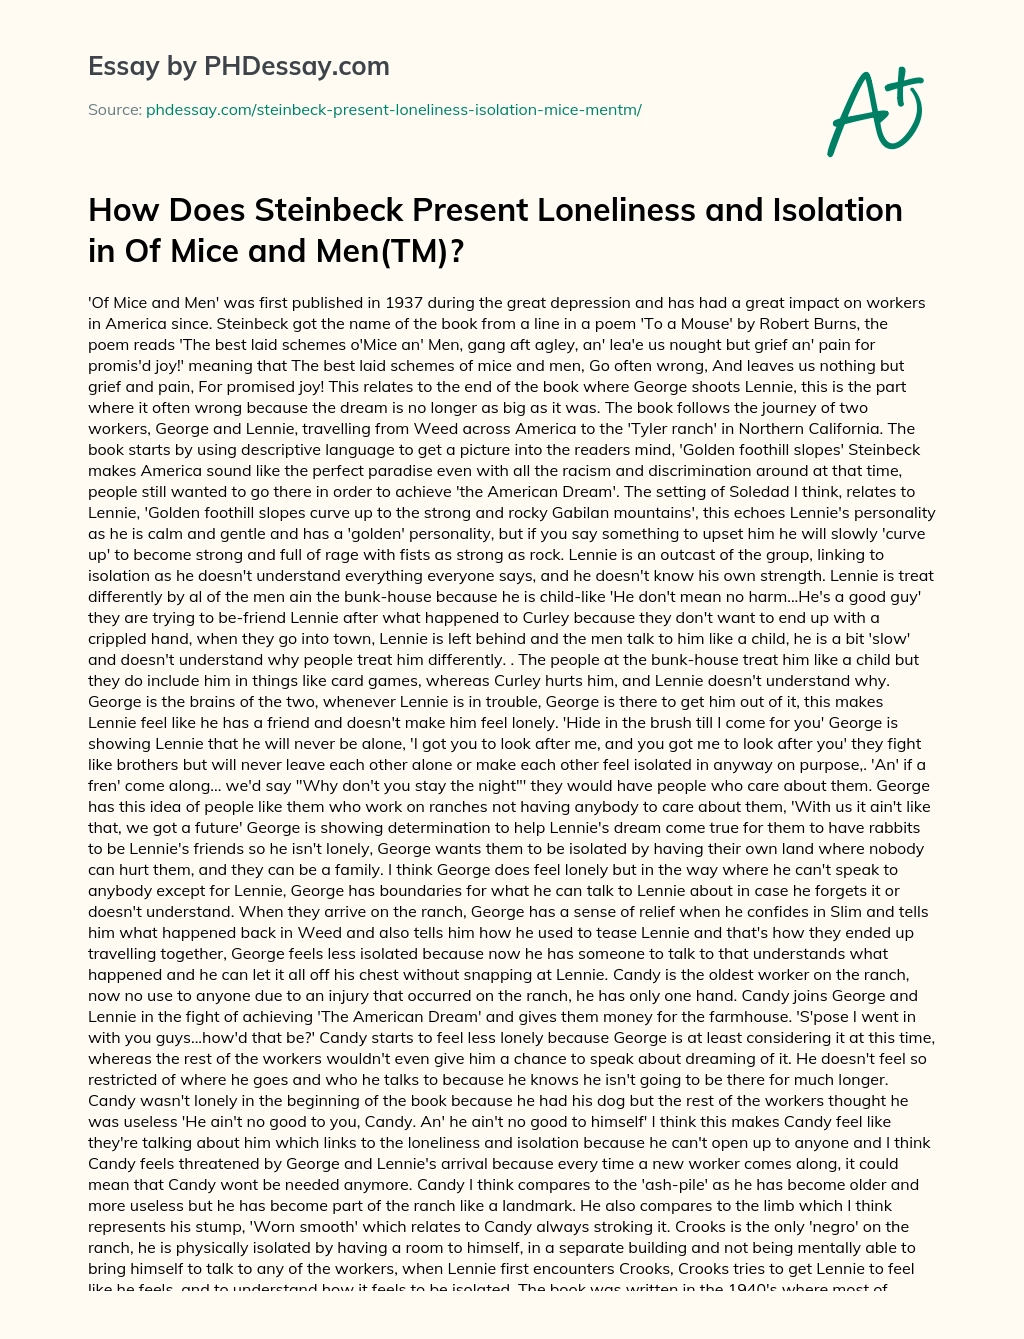 How Does Steinbeck Present Loneliness and Isolation in Of Mice and Men(TM)? essay